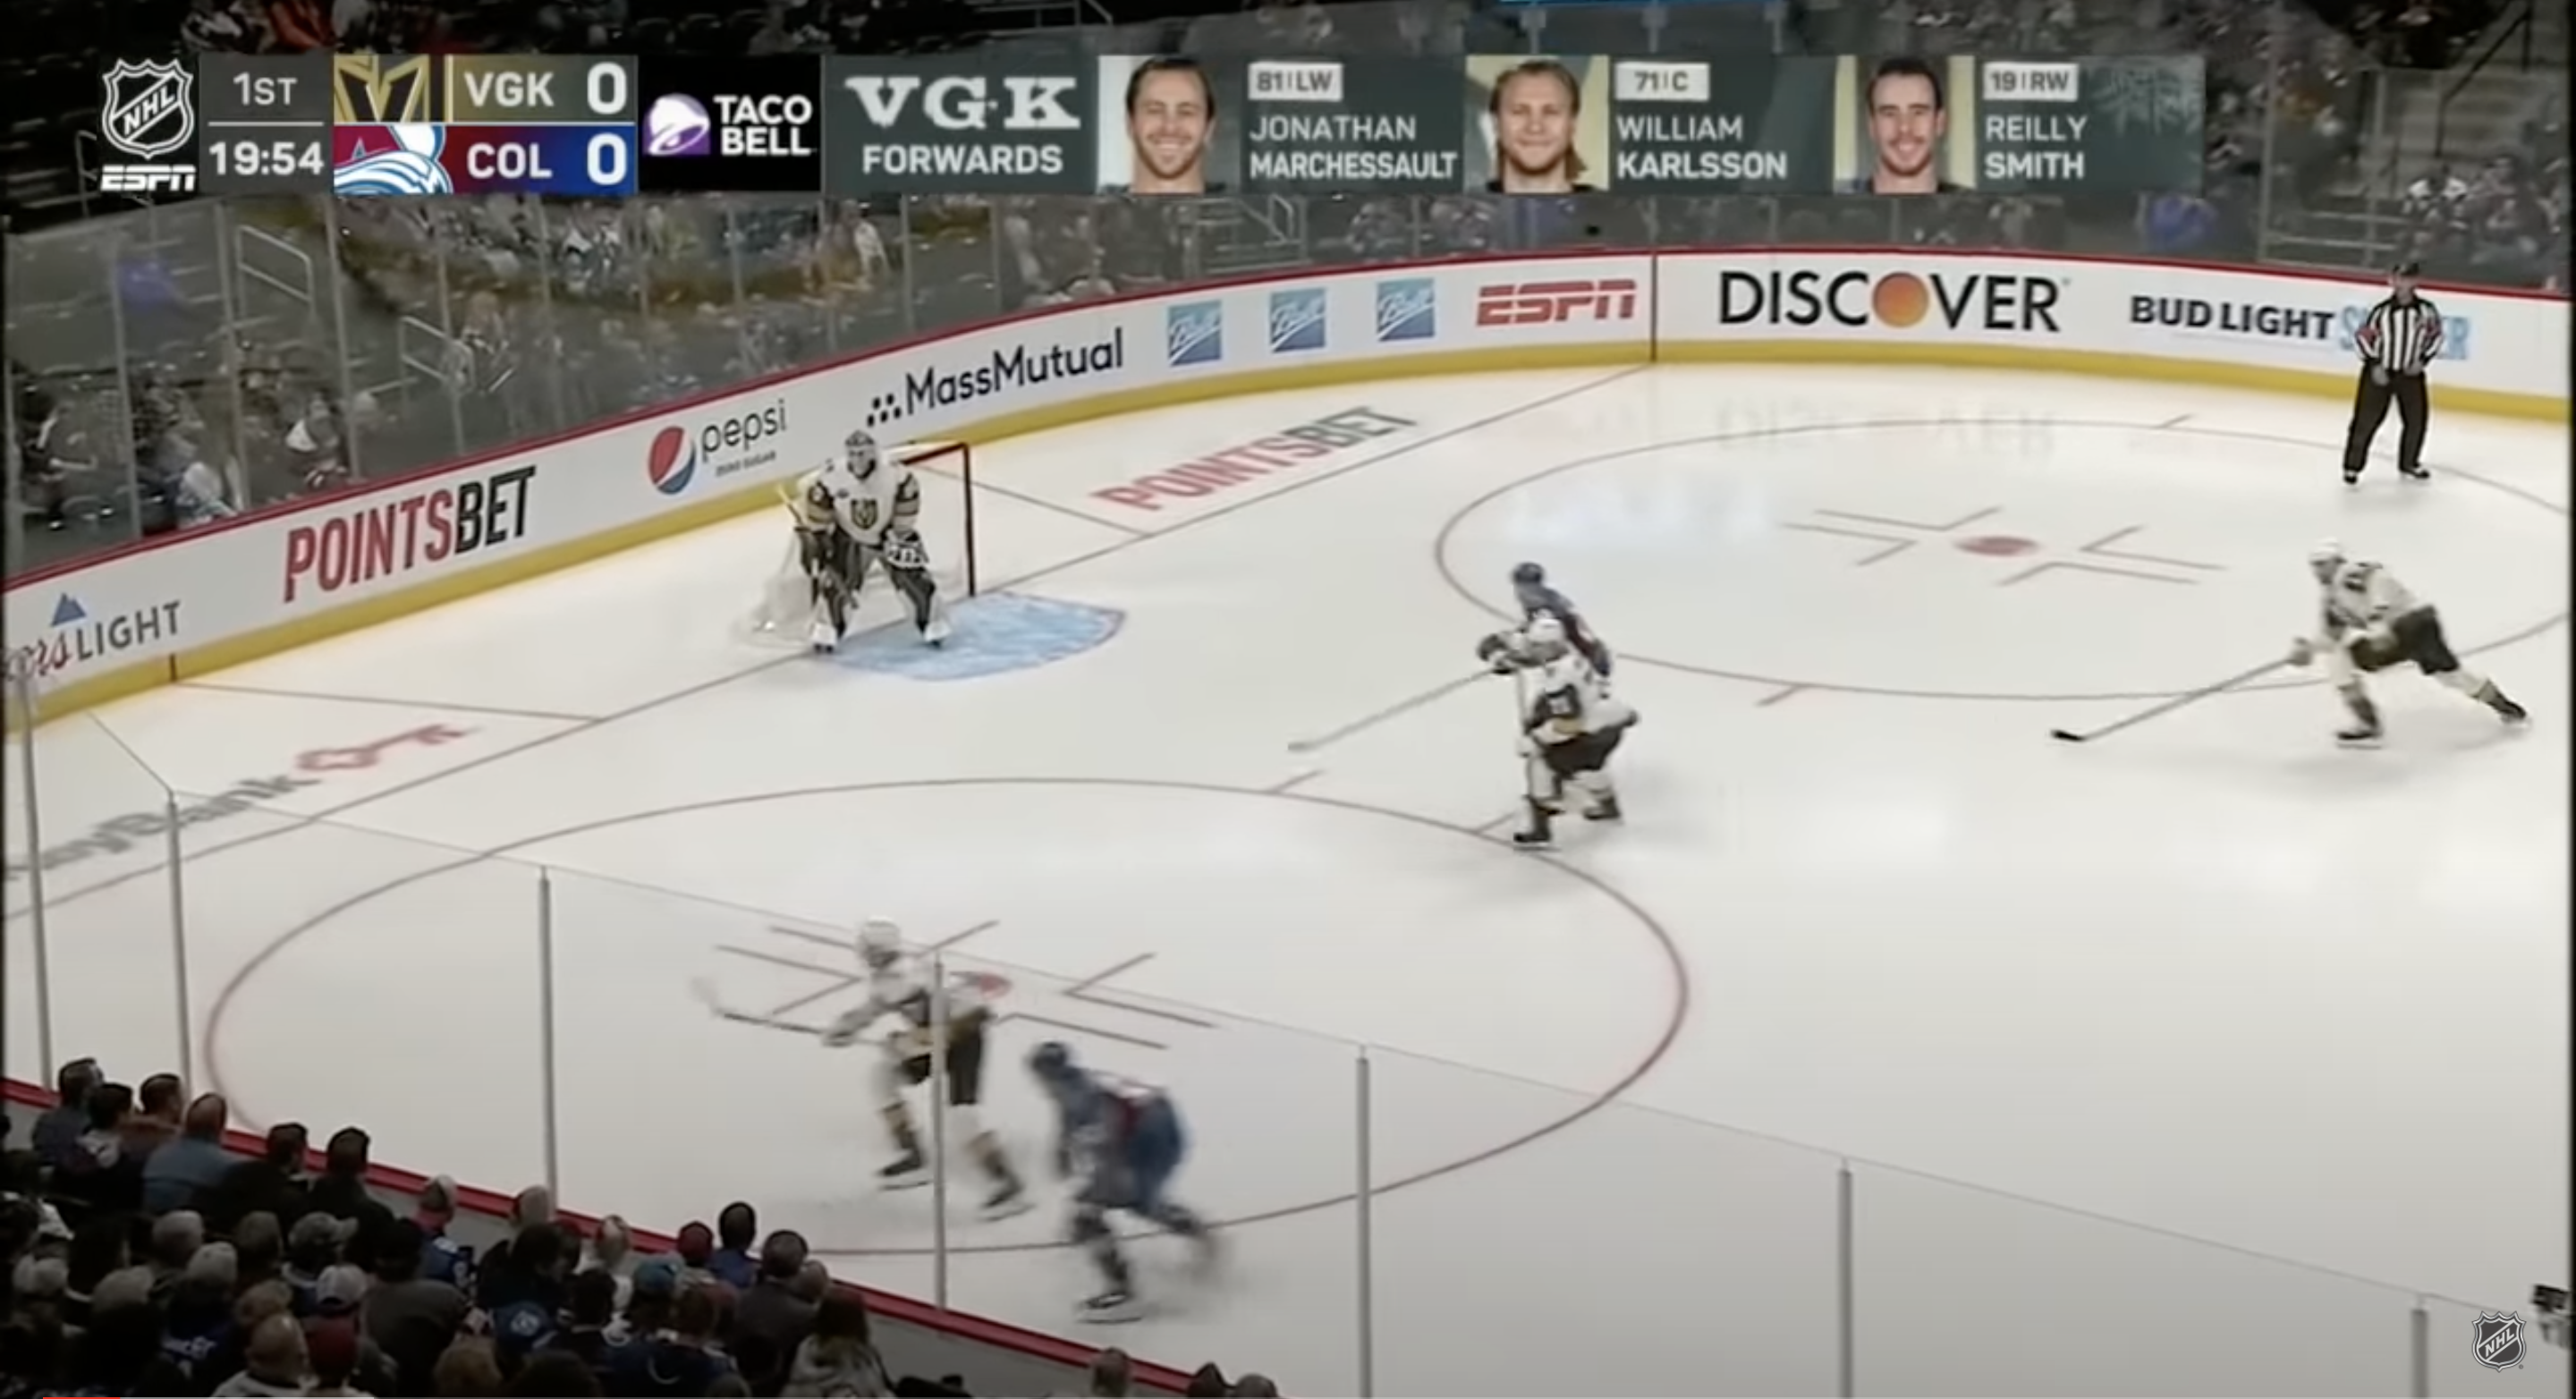 NHL on ESPN Motion Graphics and Broadcast Design Gallery